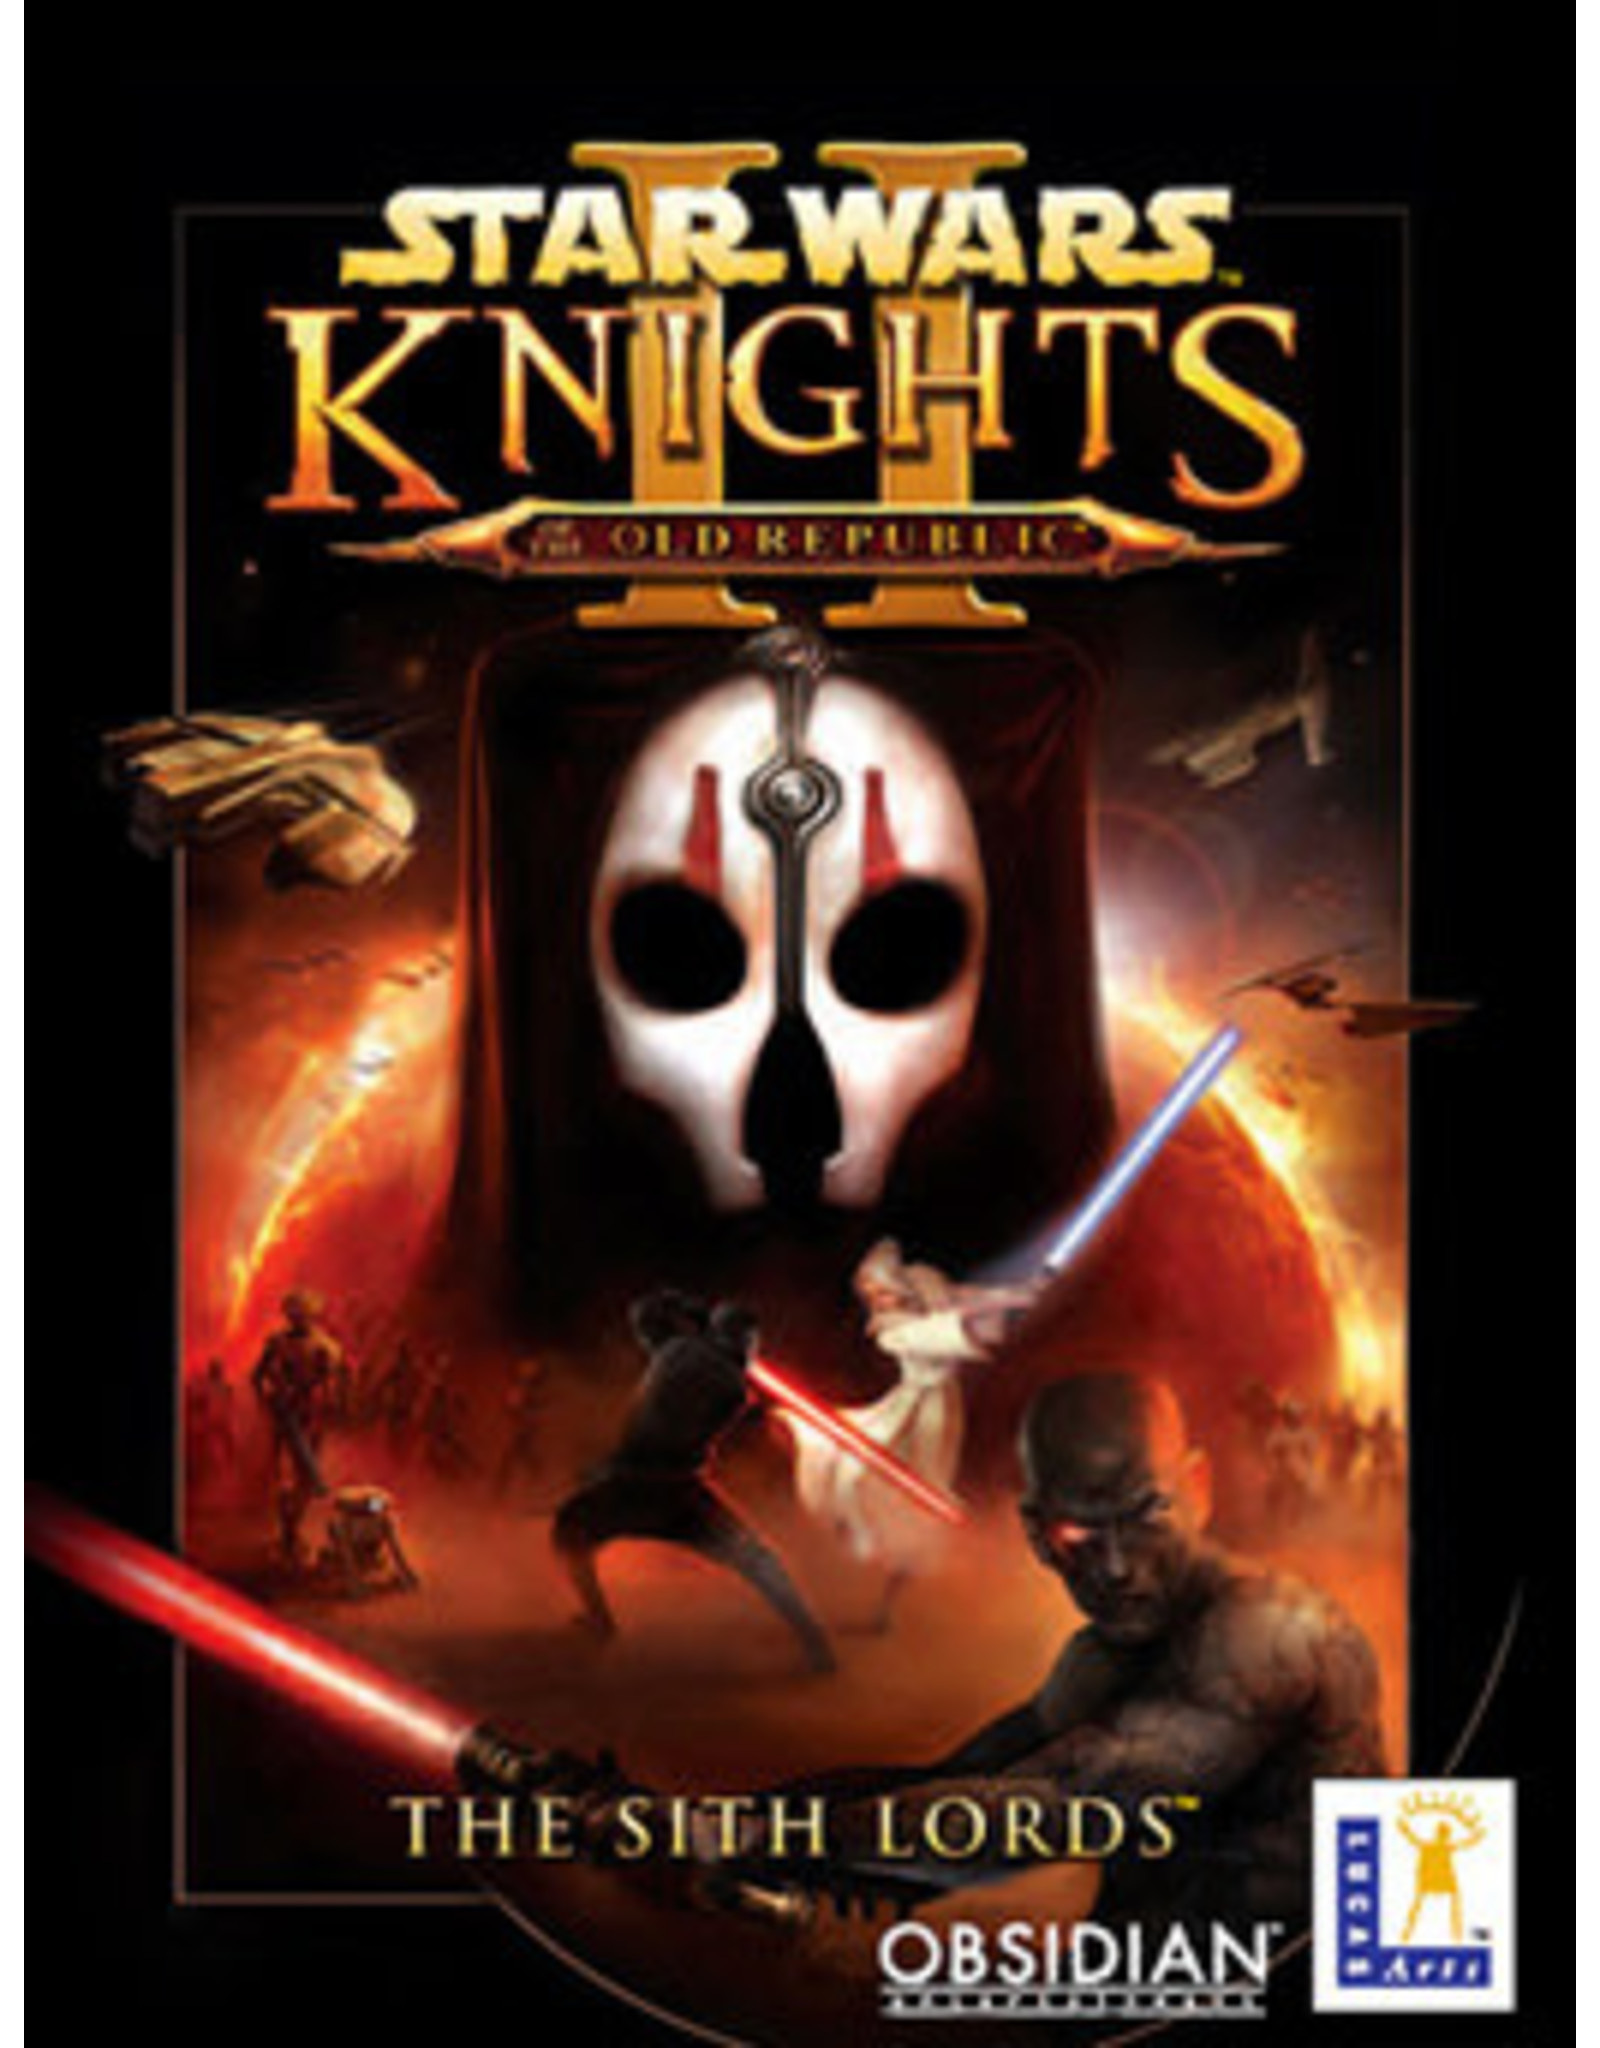 Xbox Star Wars Knights of the Old Republic II (No Manual)